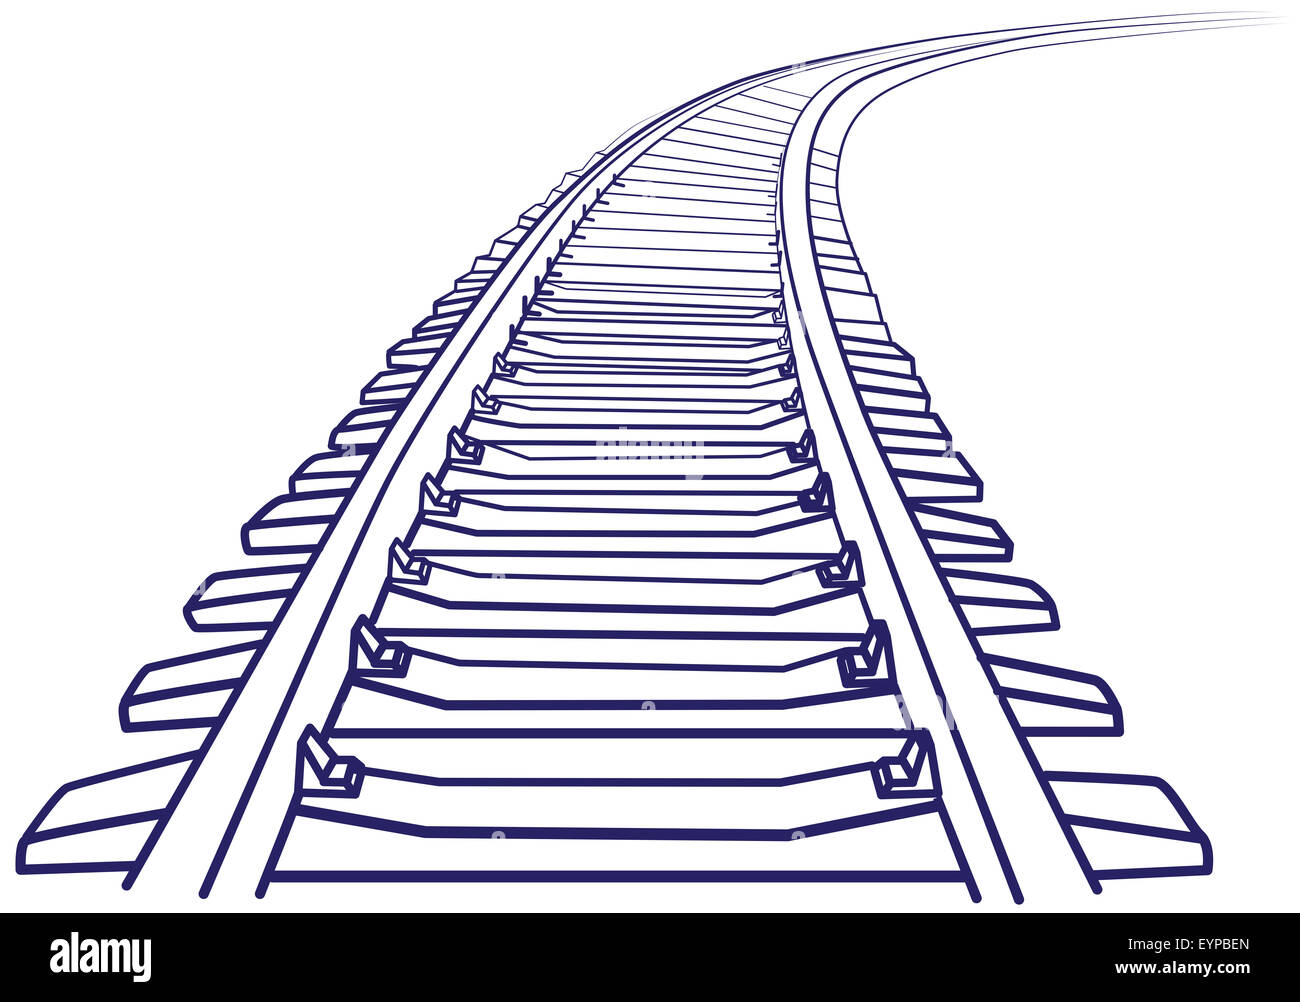 Curved endless Train track. | Stock vector | Colourbox